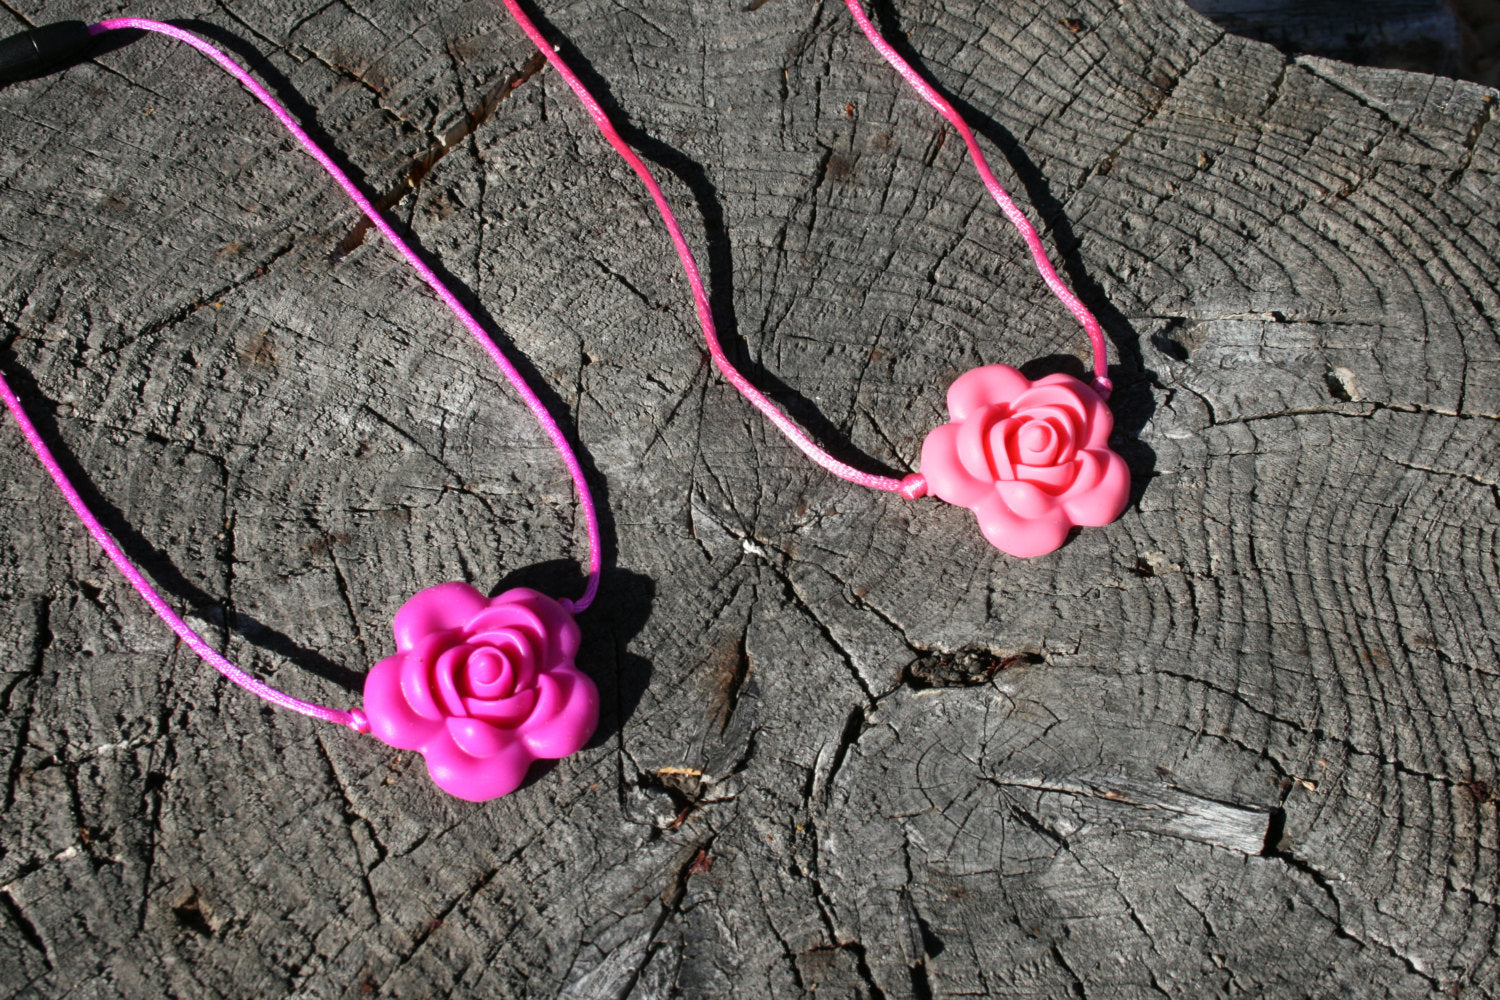 Sensory Necklace with Silicone Rose Pendant- Available in 2 colors: Hot Pink or Light Pink -This pendant and is made from food-grade silicone, strung on a nylon cord, and finished off with a plastic clasp designed to pop open when pulled (Jewelry on wooden background)  